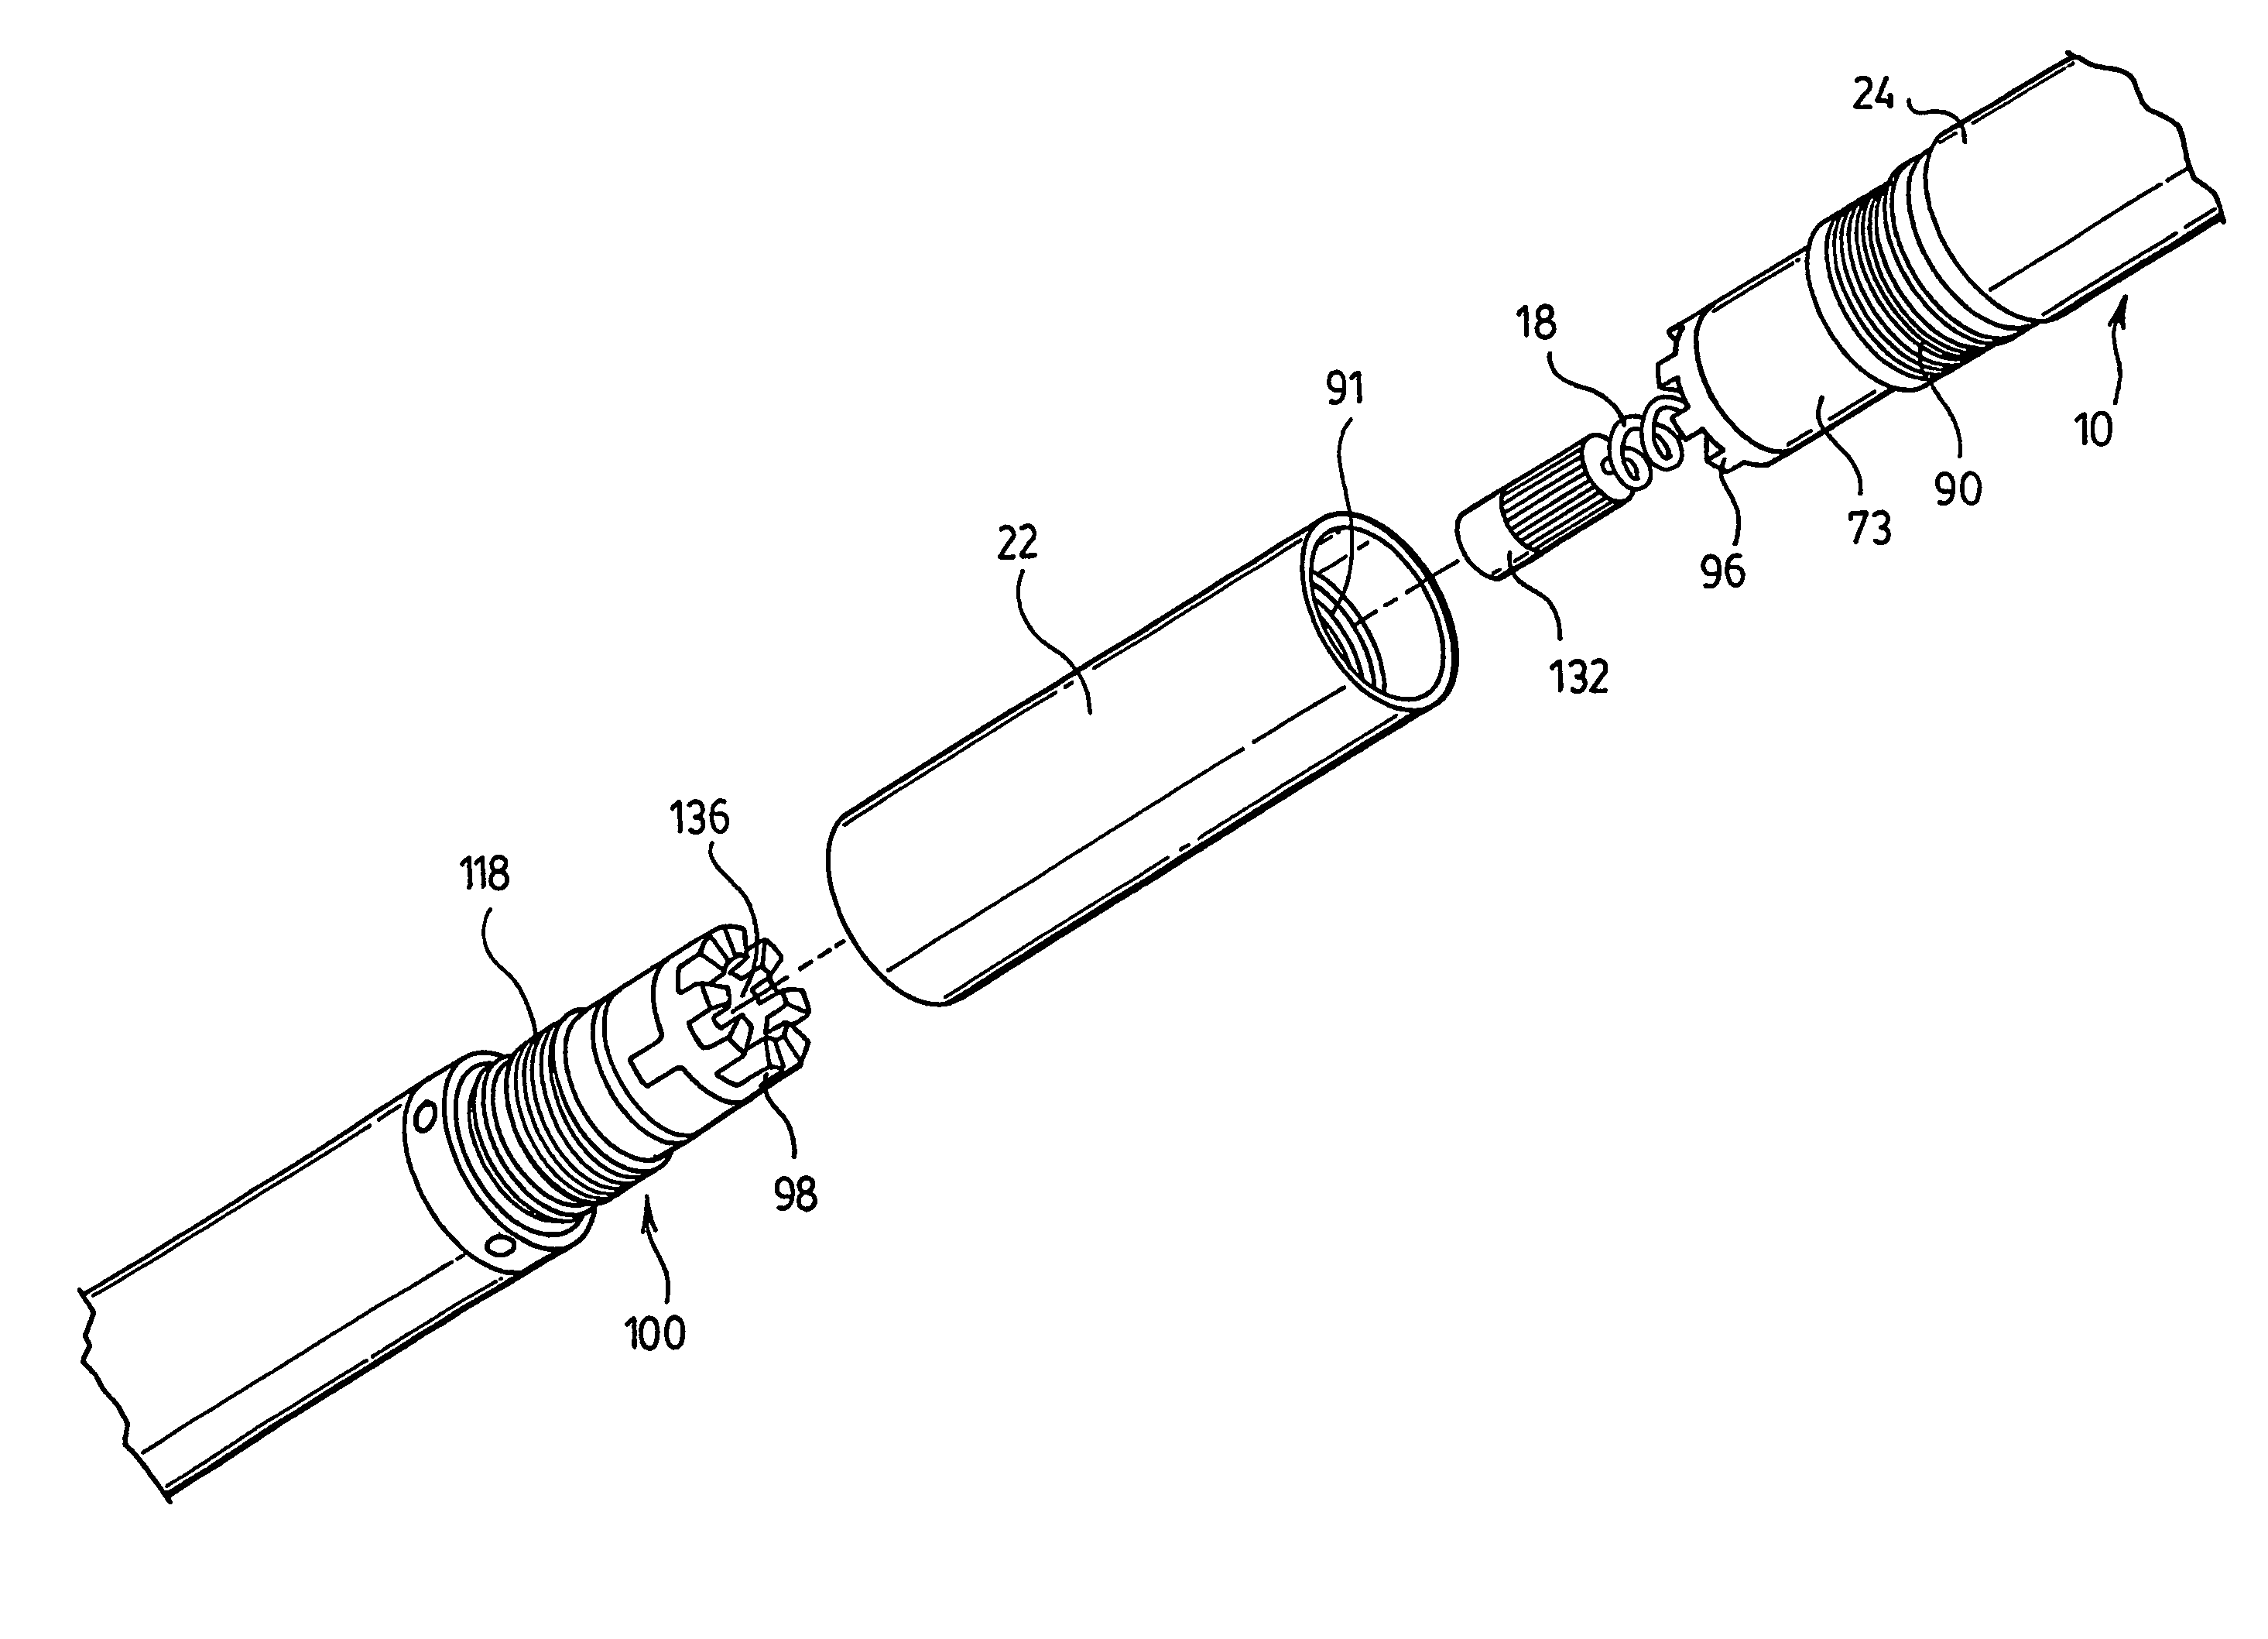 Tool module connector for use in directional drilling